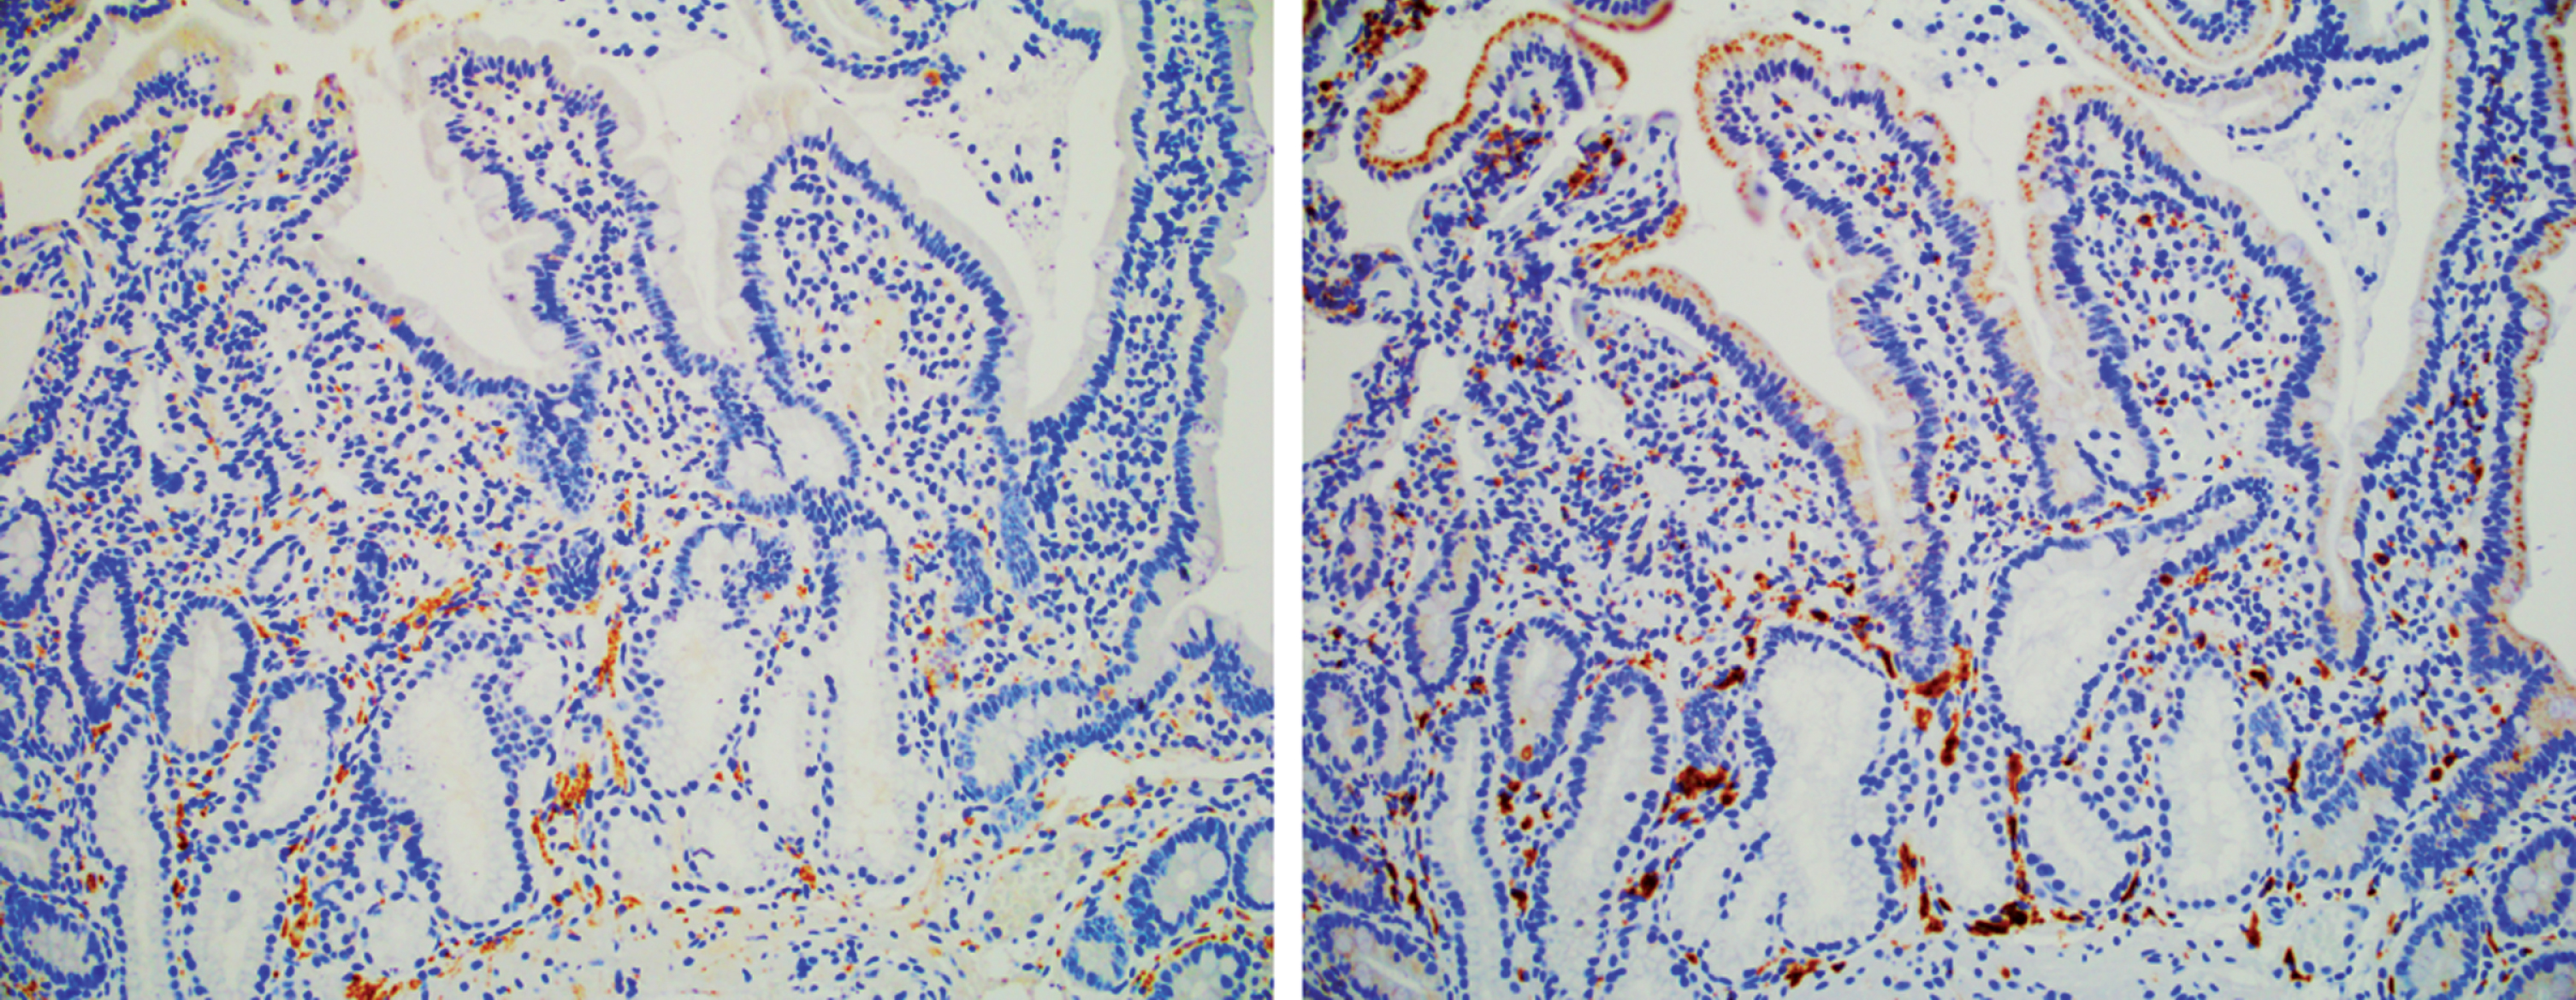 Macrophages cluster around neurons expressing αS. Human duodenal biopsy from a pediatric patient presenting with upper GI distress. Left, immune-stained for αS; Right, immune-stained for CD68 antigen (macrophage) [25].